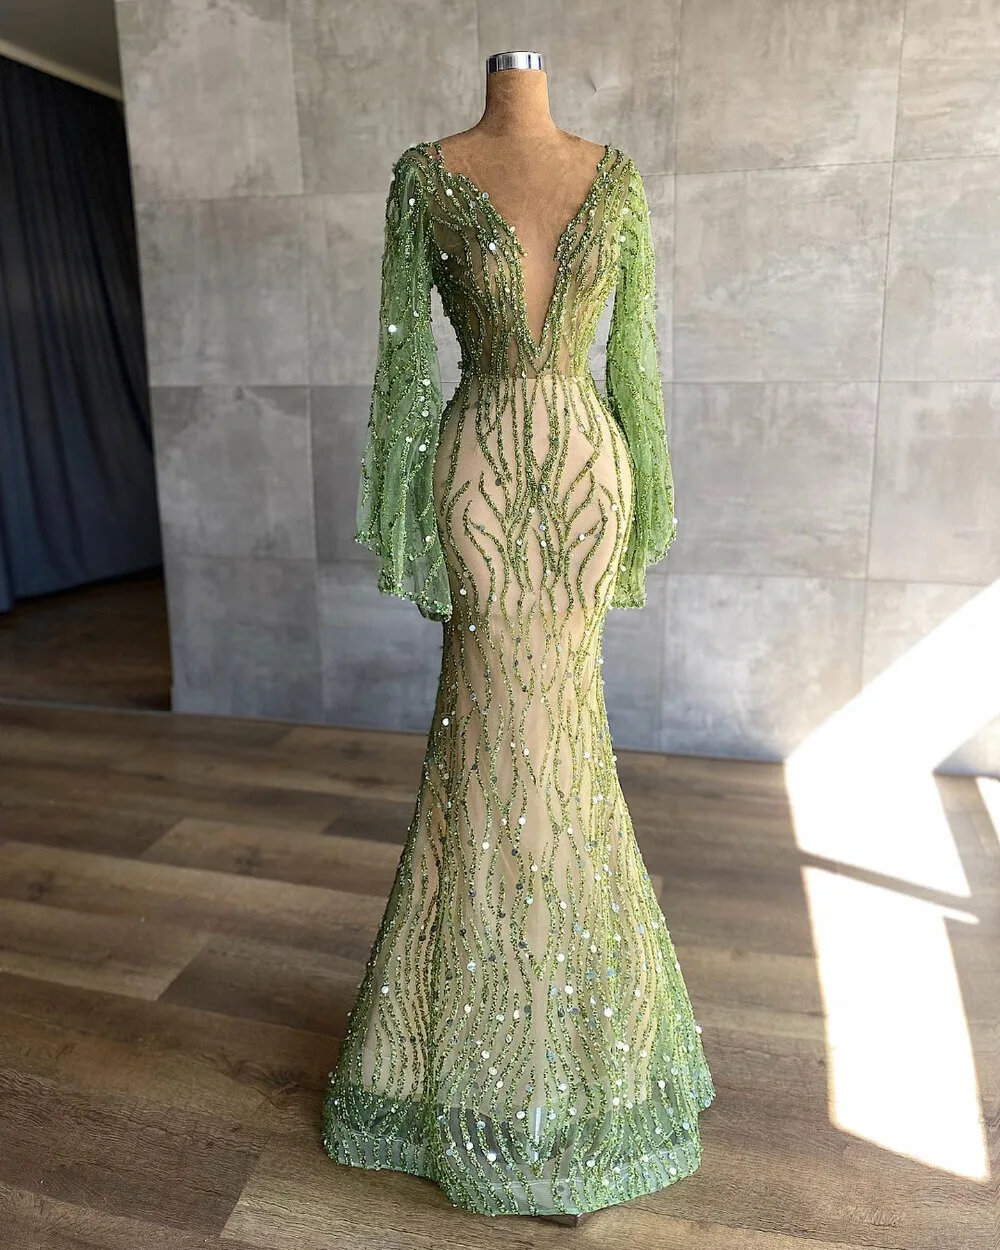 Bling Green Beaded Sequined Mermaid Evening Dresses With Flare Sleeves Luxury Long Evening Gowns Dubai Formal Occasion